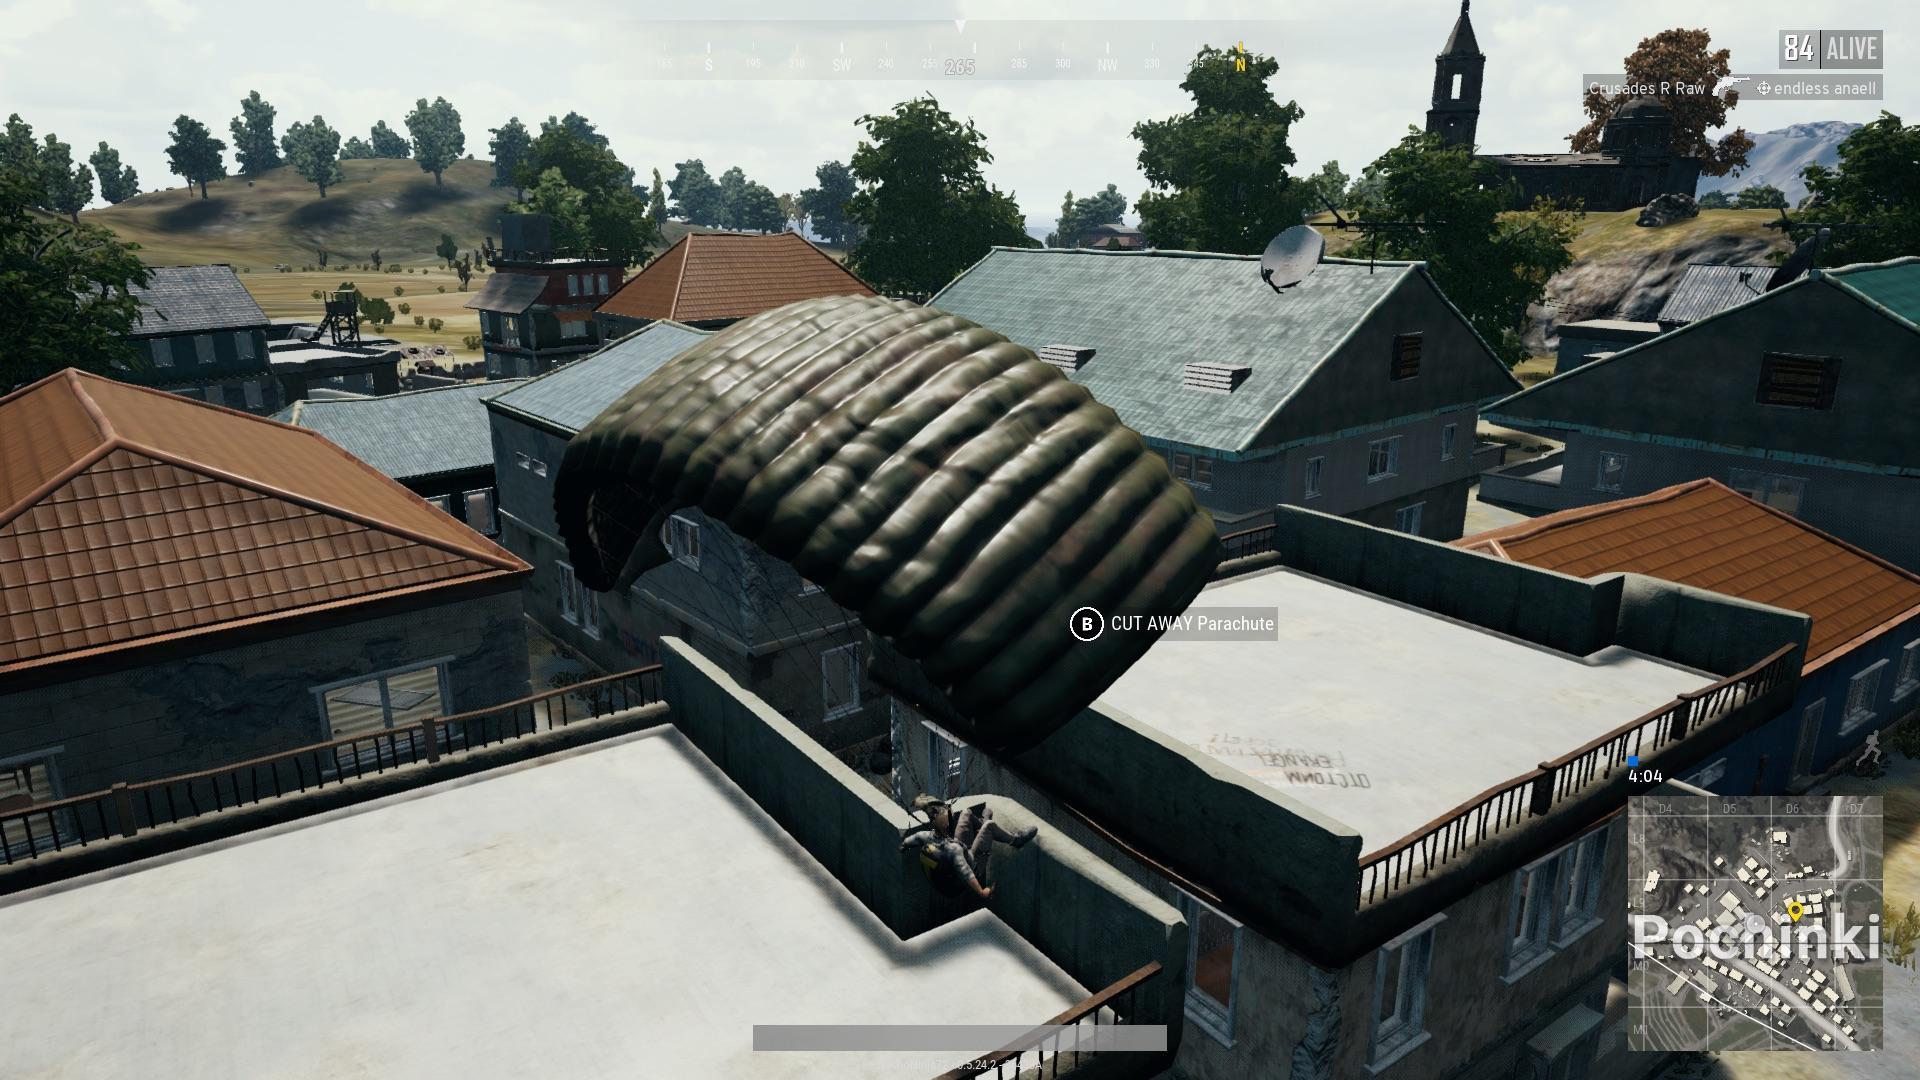 Couldn't cut away and got stuck on this building in pochinki. Happened to anyone else? : PUBGXboxOne